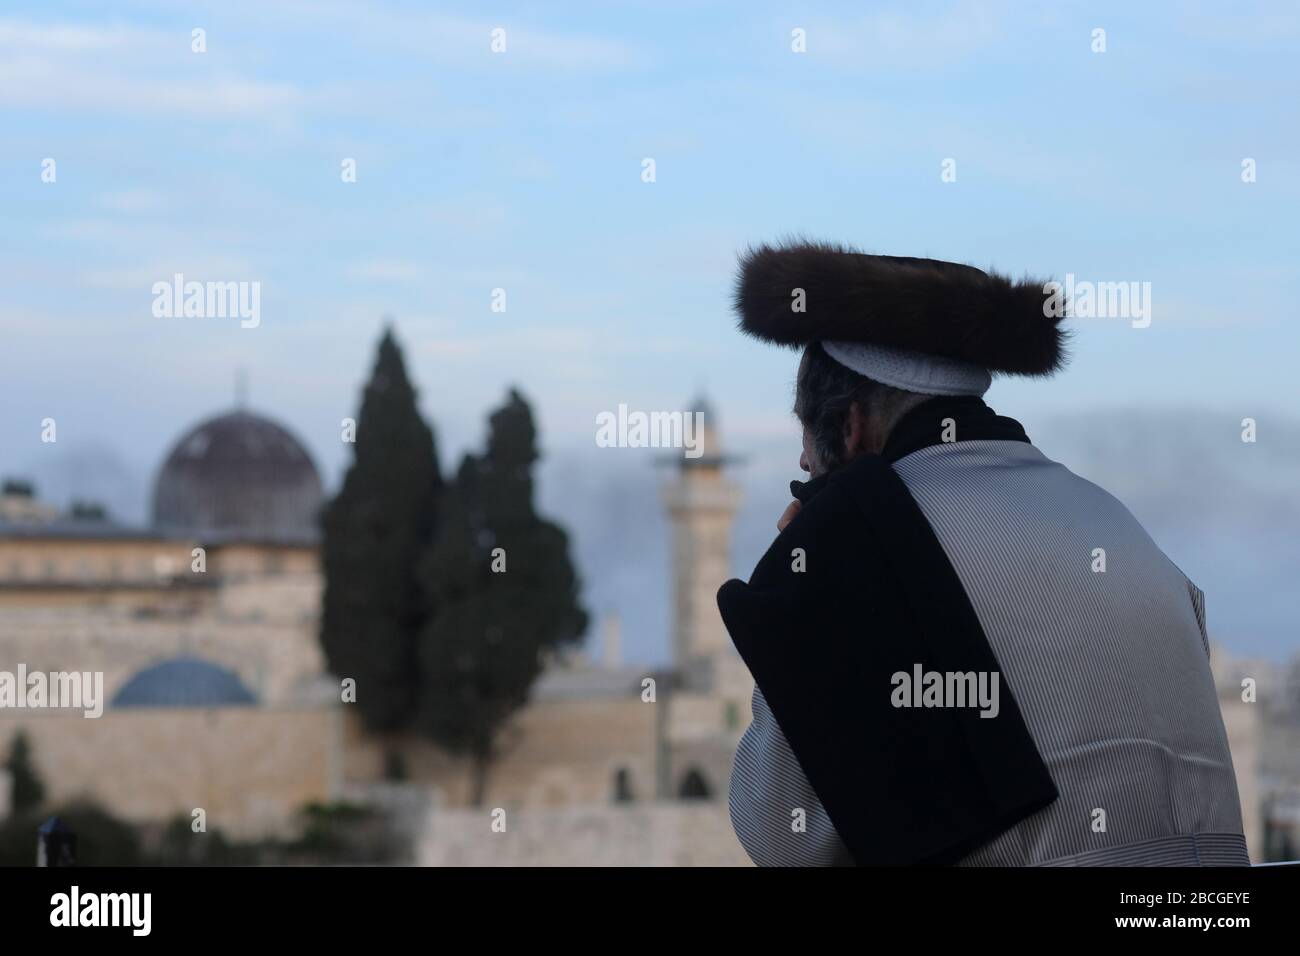 A Hasidic Jew wearing a shtreimel a fur hat worn by many married Haredi Jewish men looks at Al Aqsa mosque an Islamic shrine located on the Temple Mount known to Muslims as the Haram esh-Sharif in the Old City East Jerusalem Israel Stock Photo